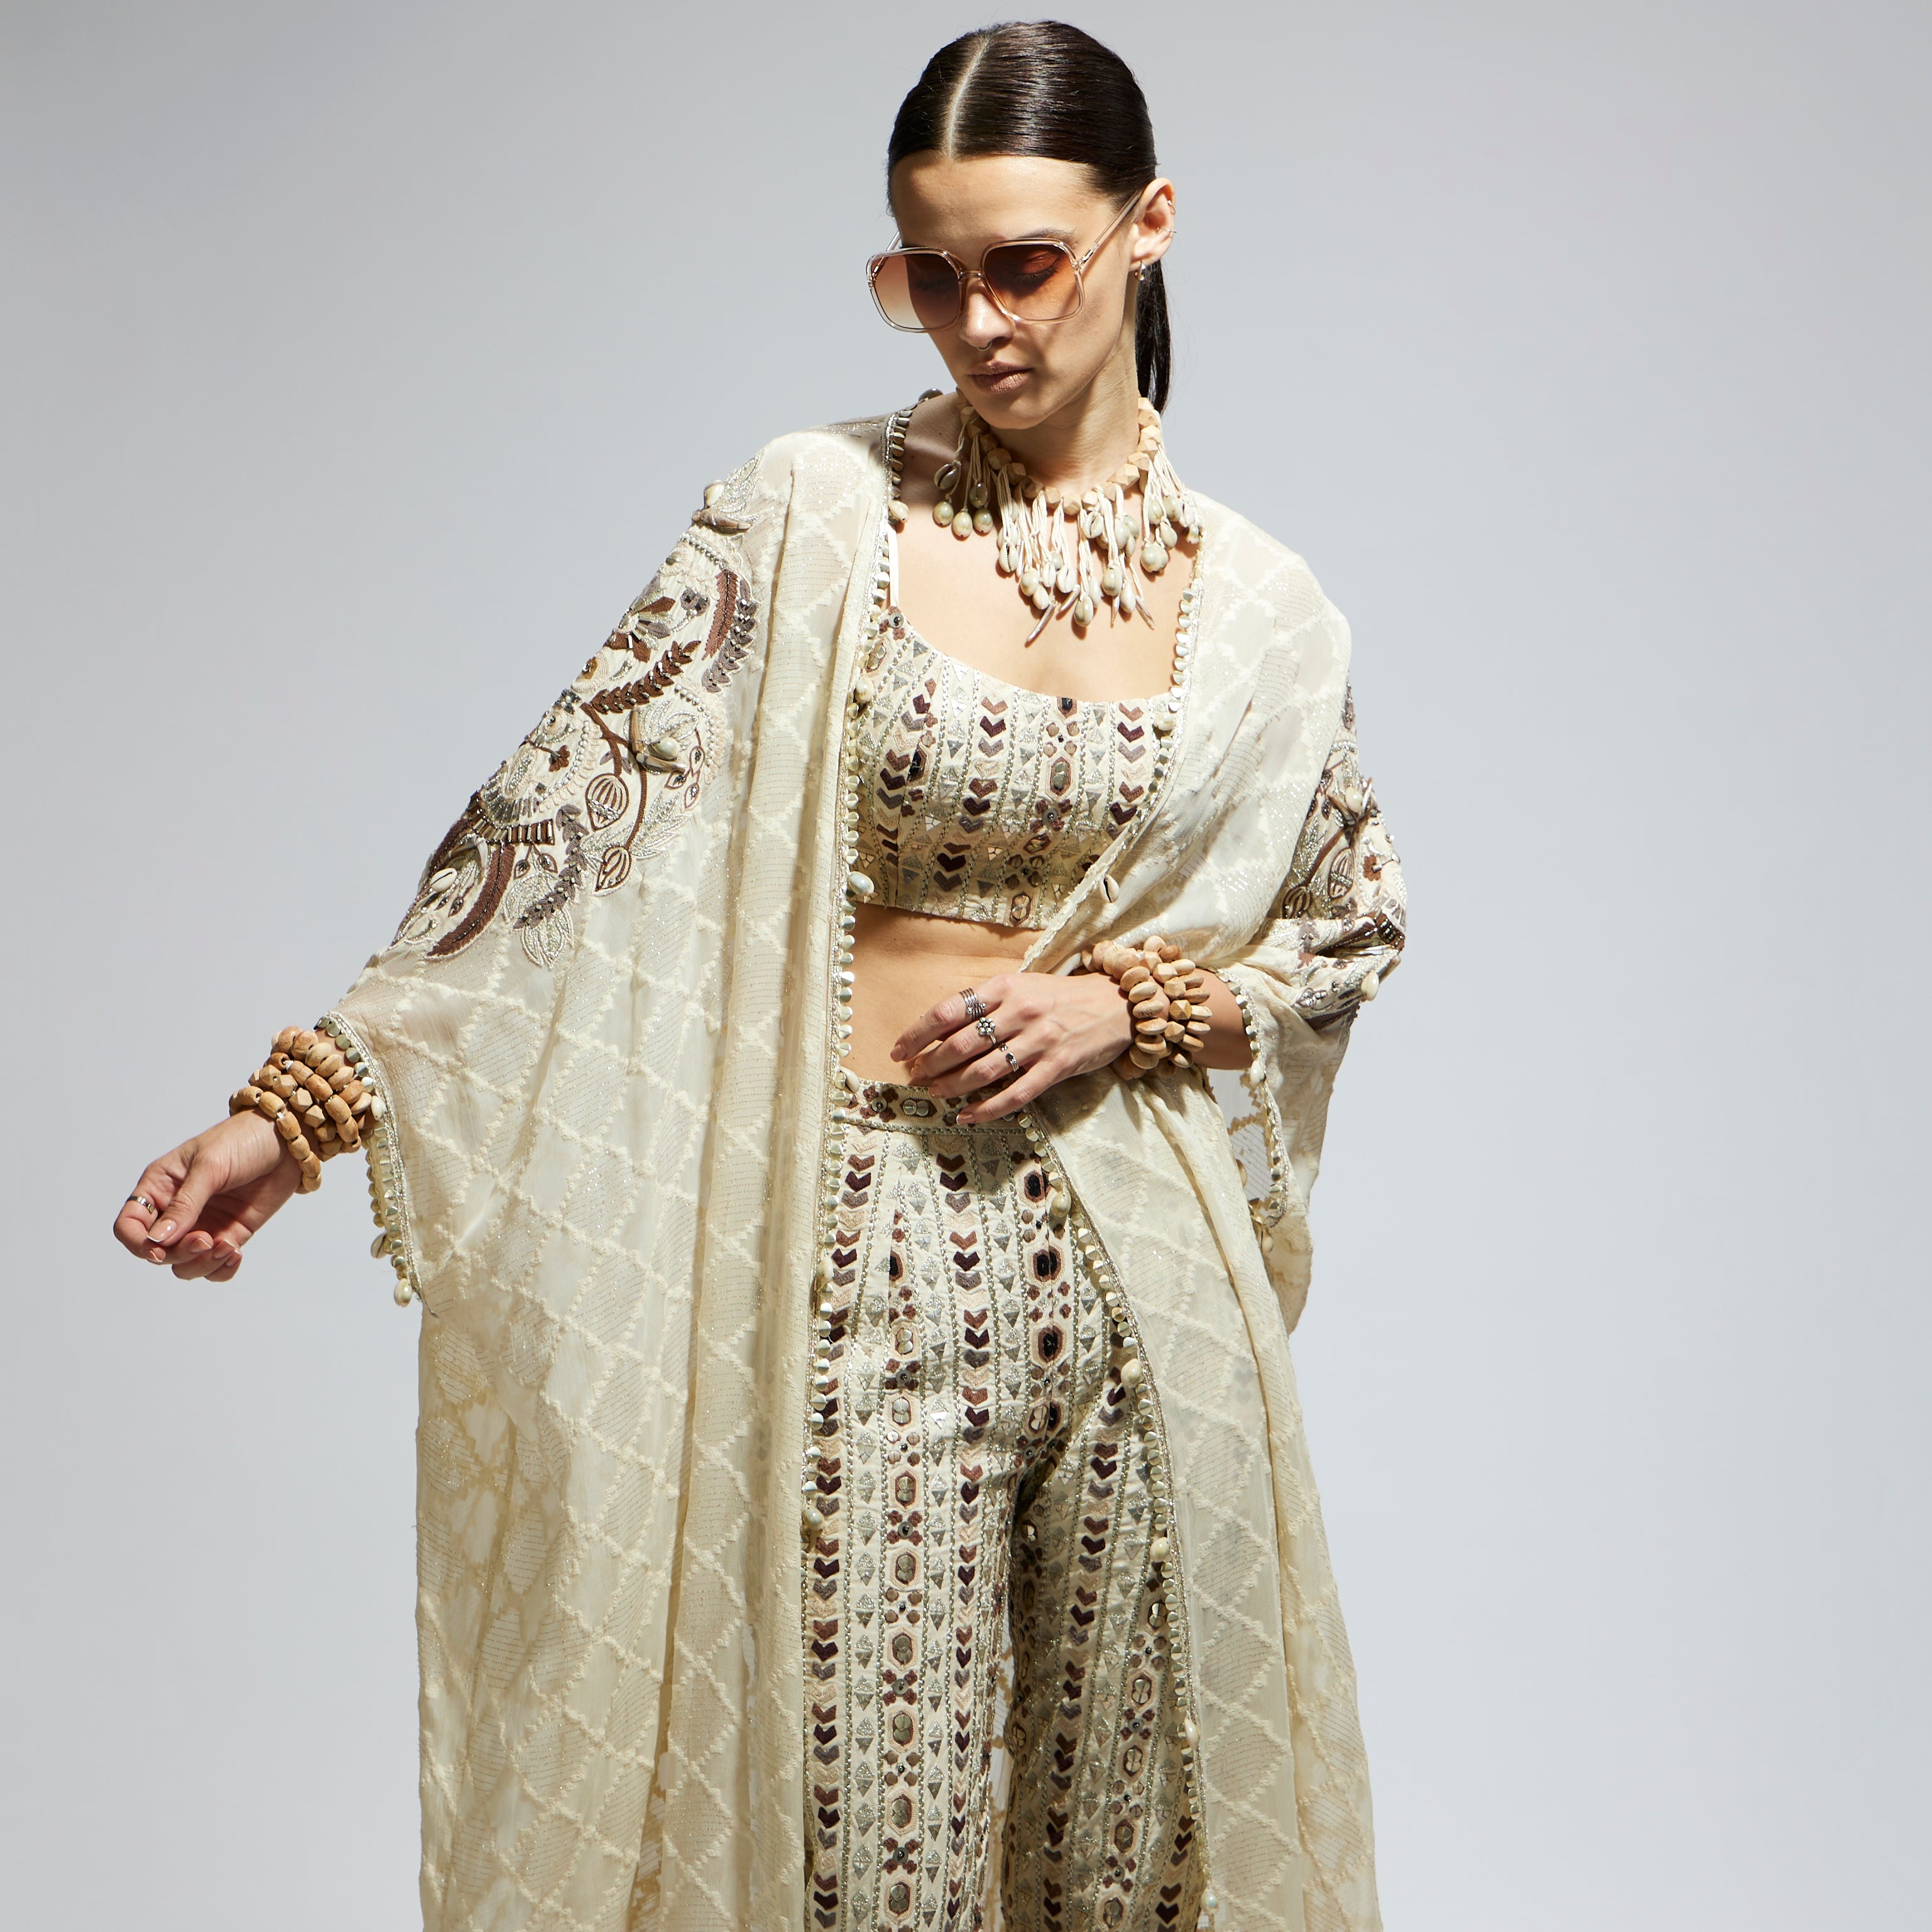 IVORY AZTEC EMBELLISHED CAPE PAIRED WITH HEAVILY EMBELLISHED BUSTIER AND PANTS